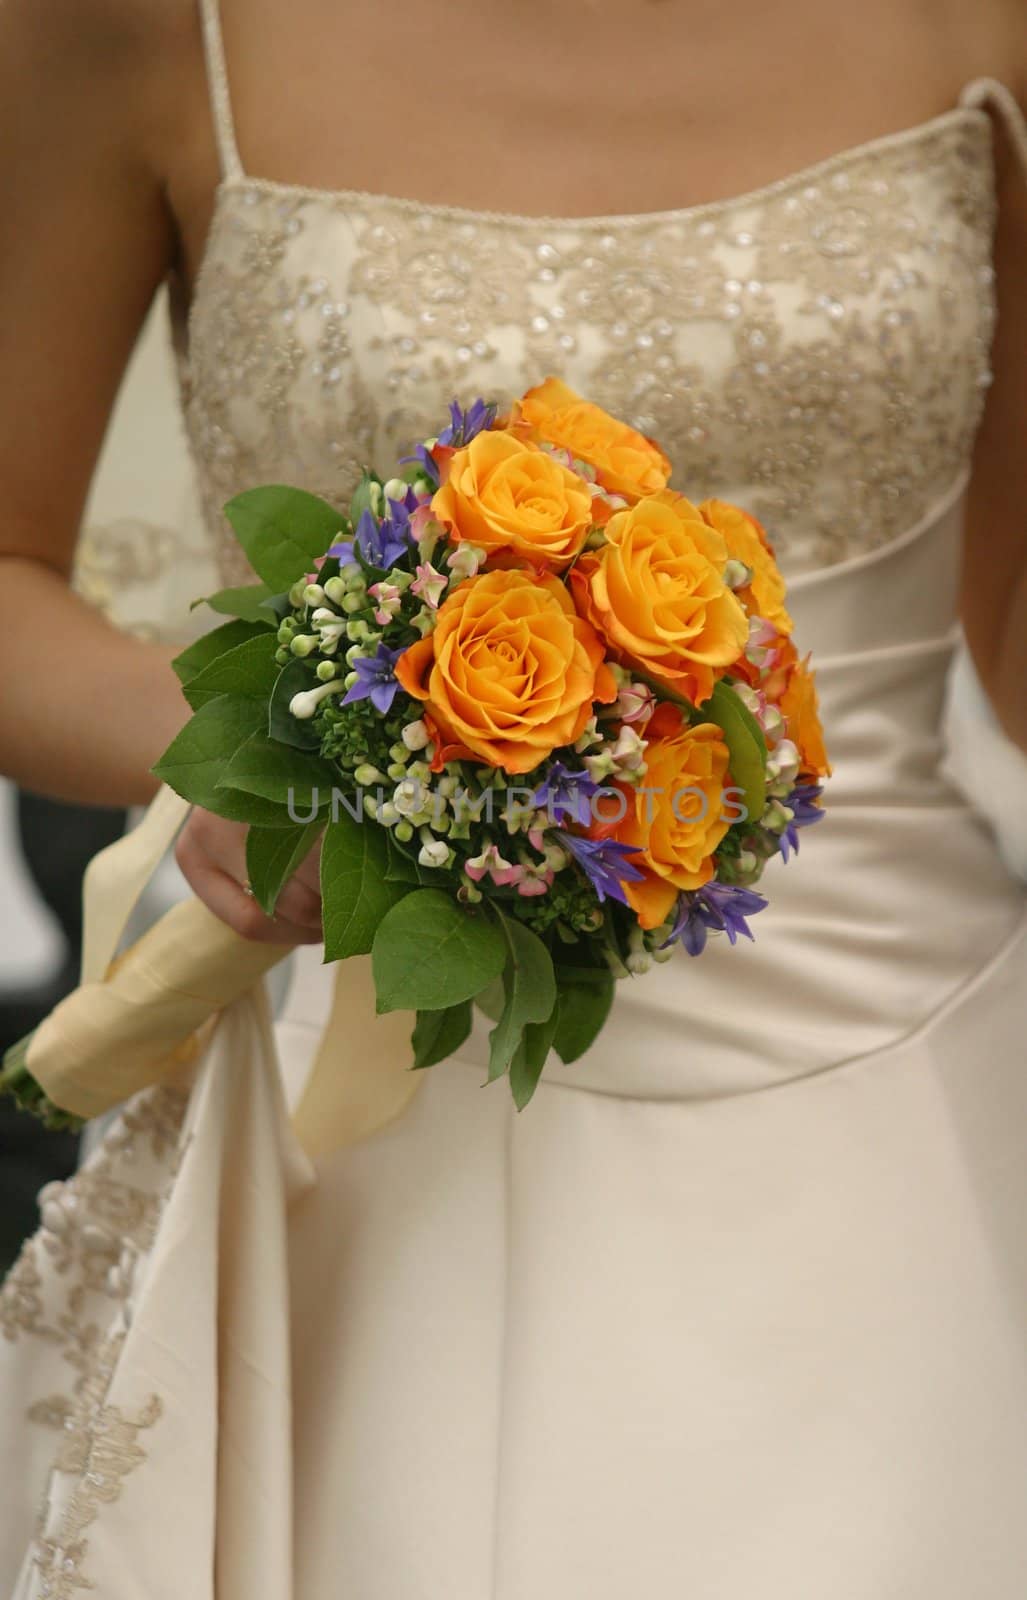 Wedding bouquet from yellow roses in hands of the bride